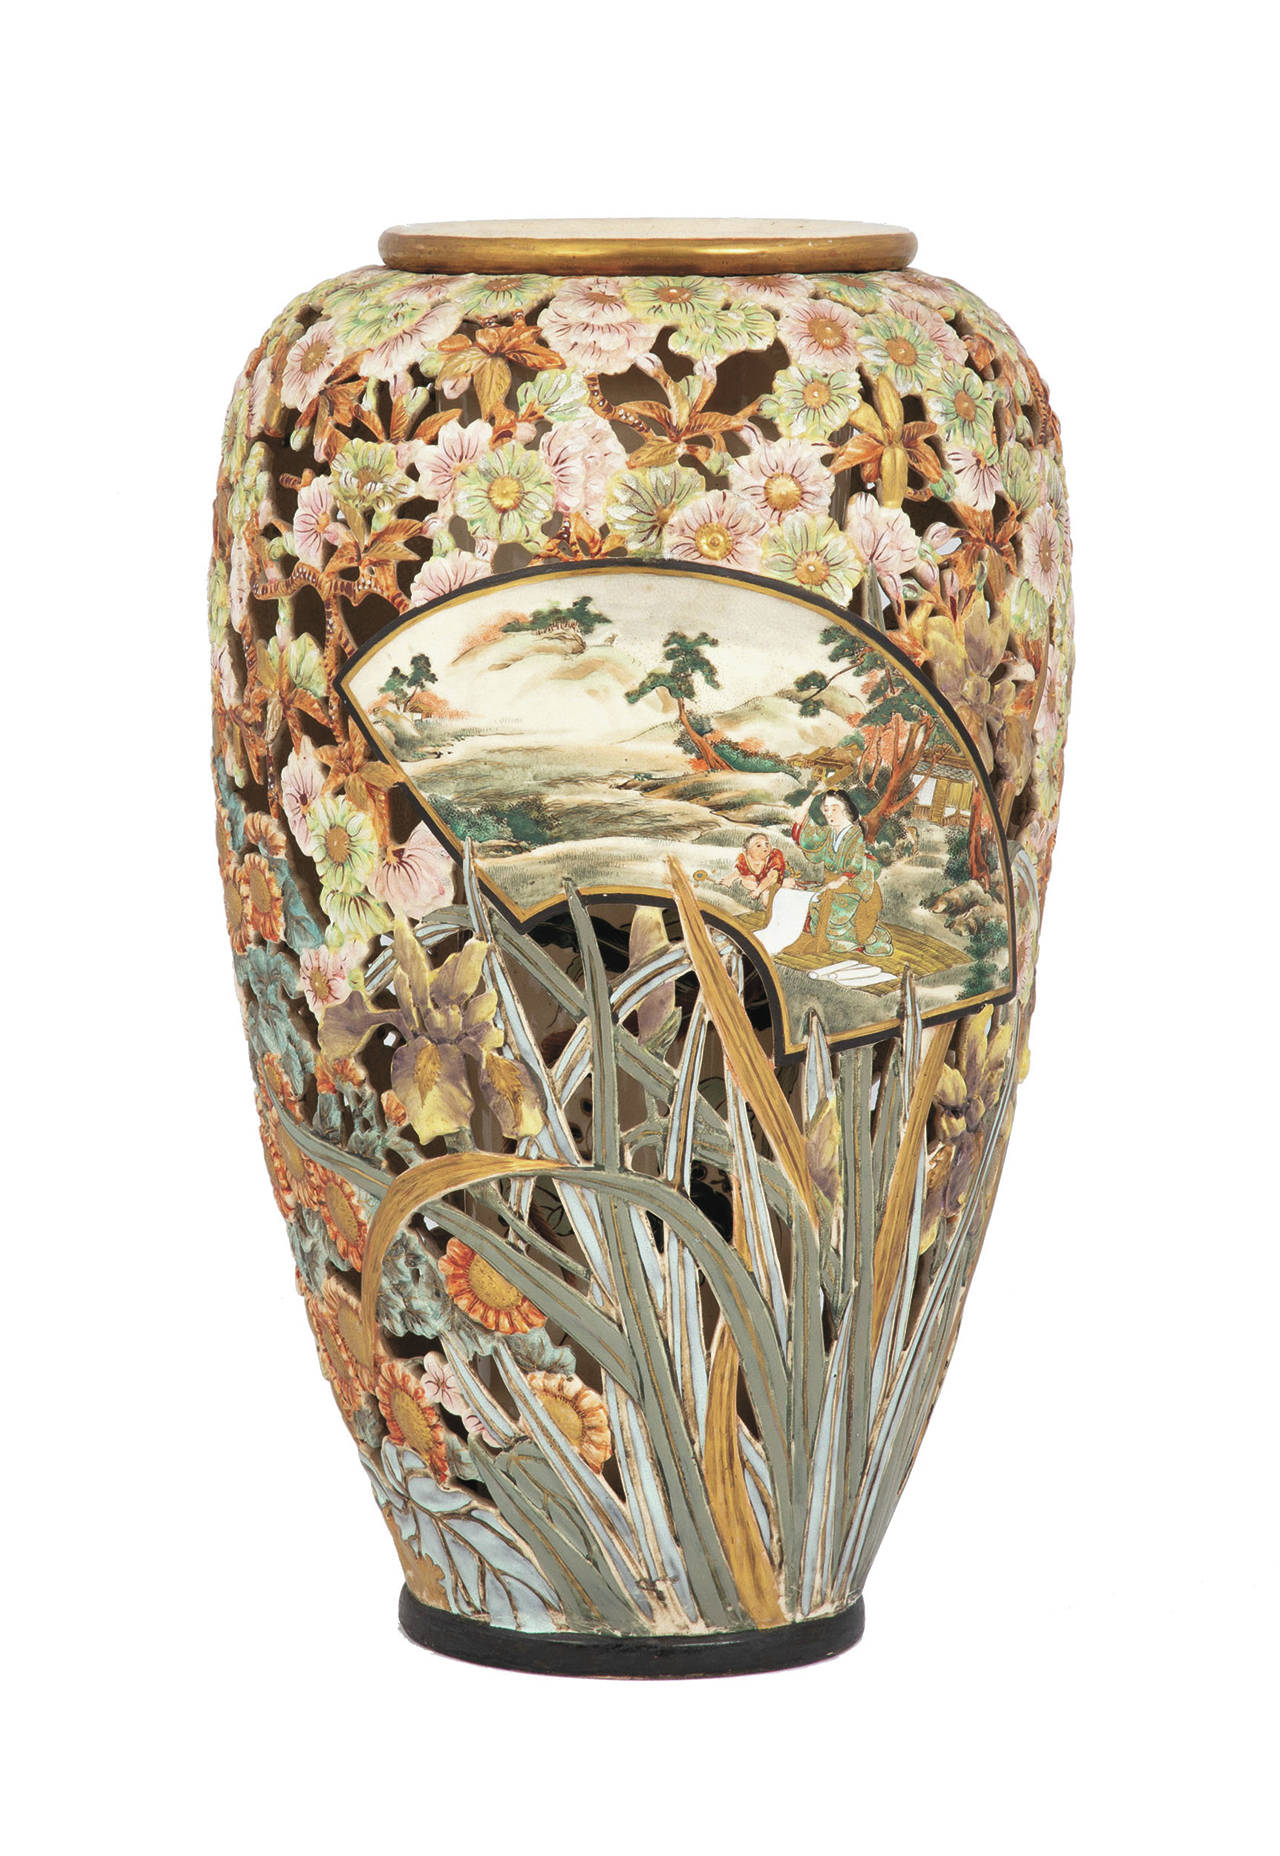 This Satsuma vase with intricate reticulation and decoration brought over $14,000 at a Cottone auction. (Cowles Syndicate Inc.)